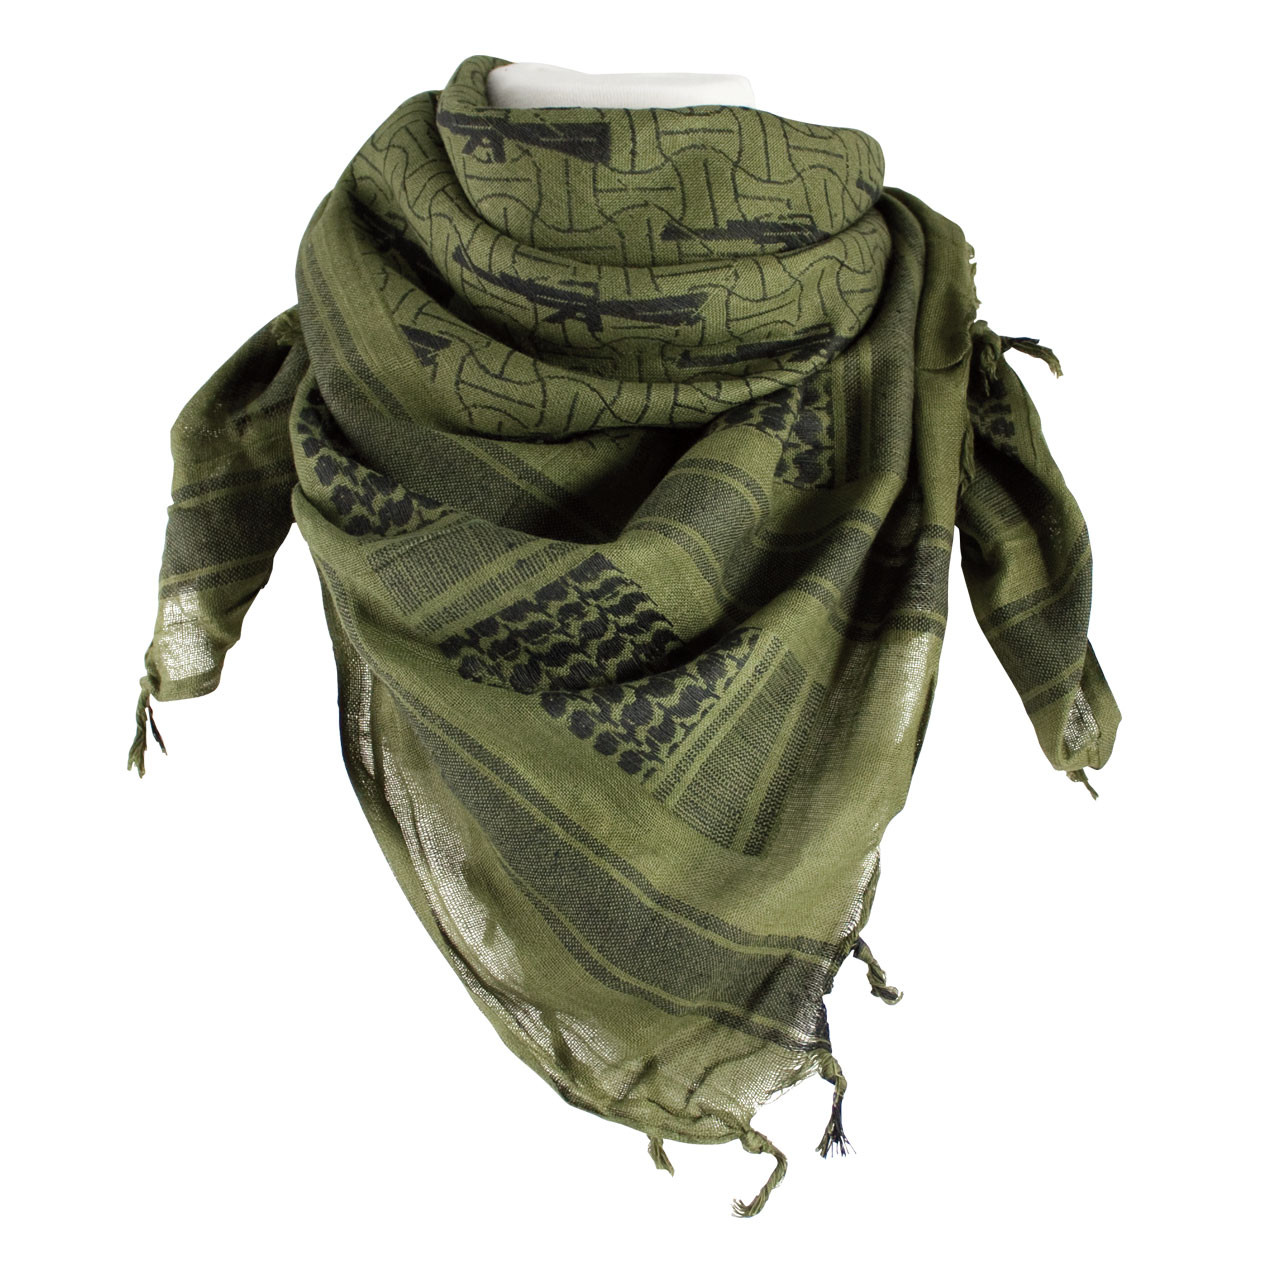 Low price & fast shipping15 Ways to Wear a Keffiyeh & Shemagh (PHOTOS ...